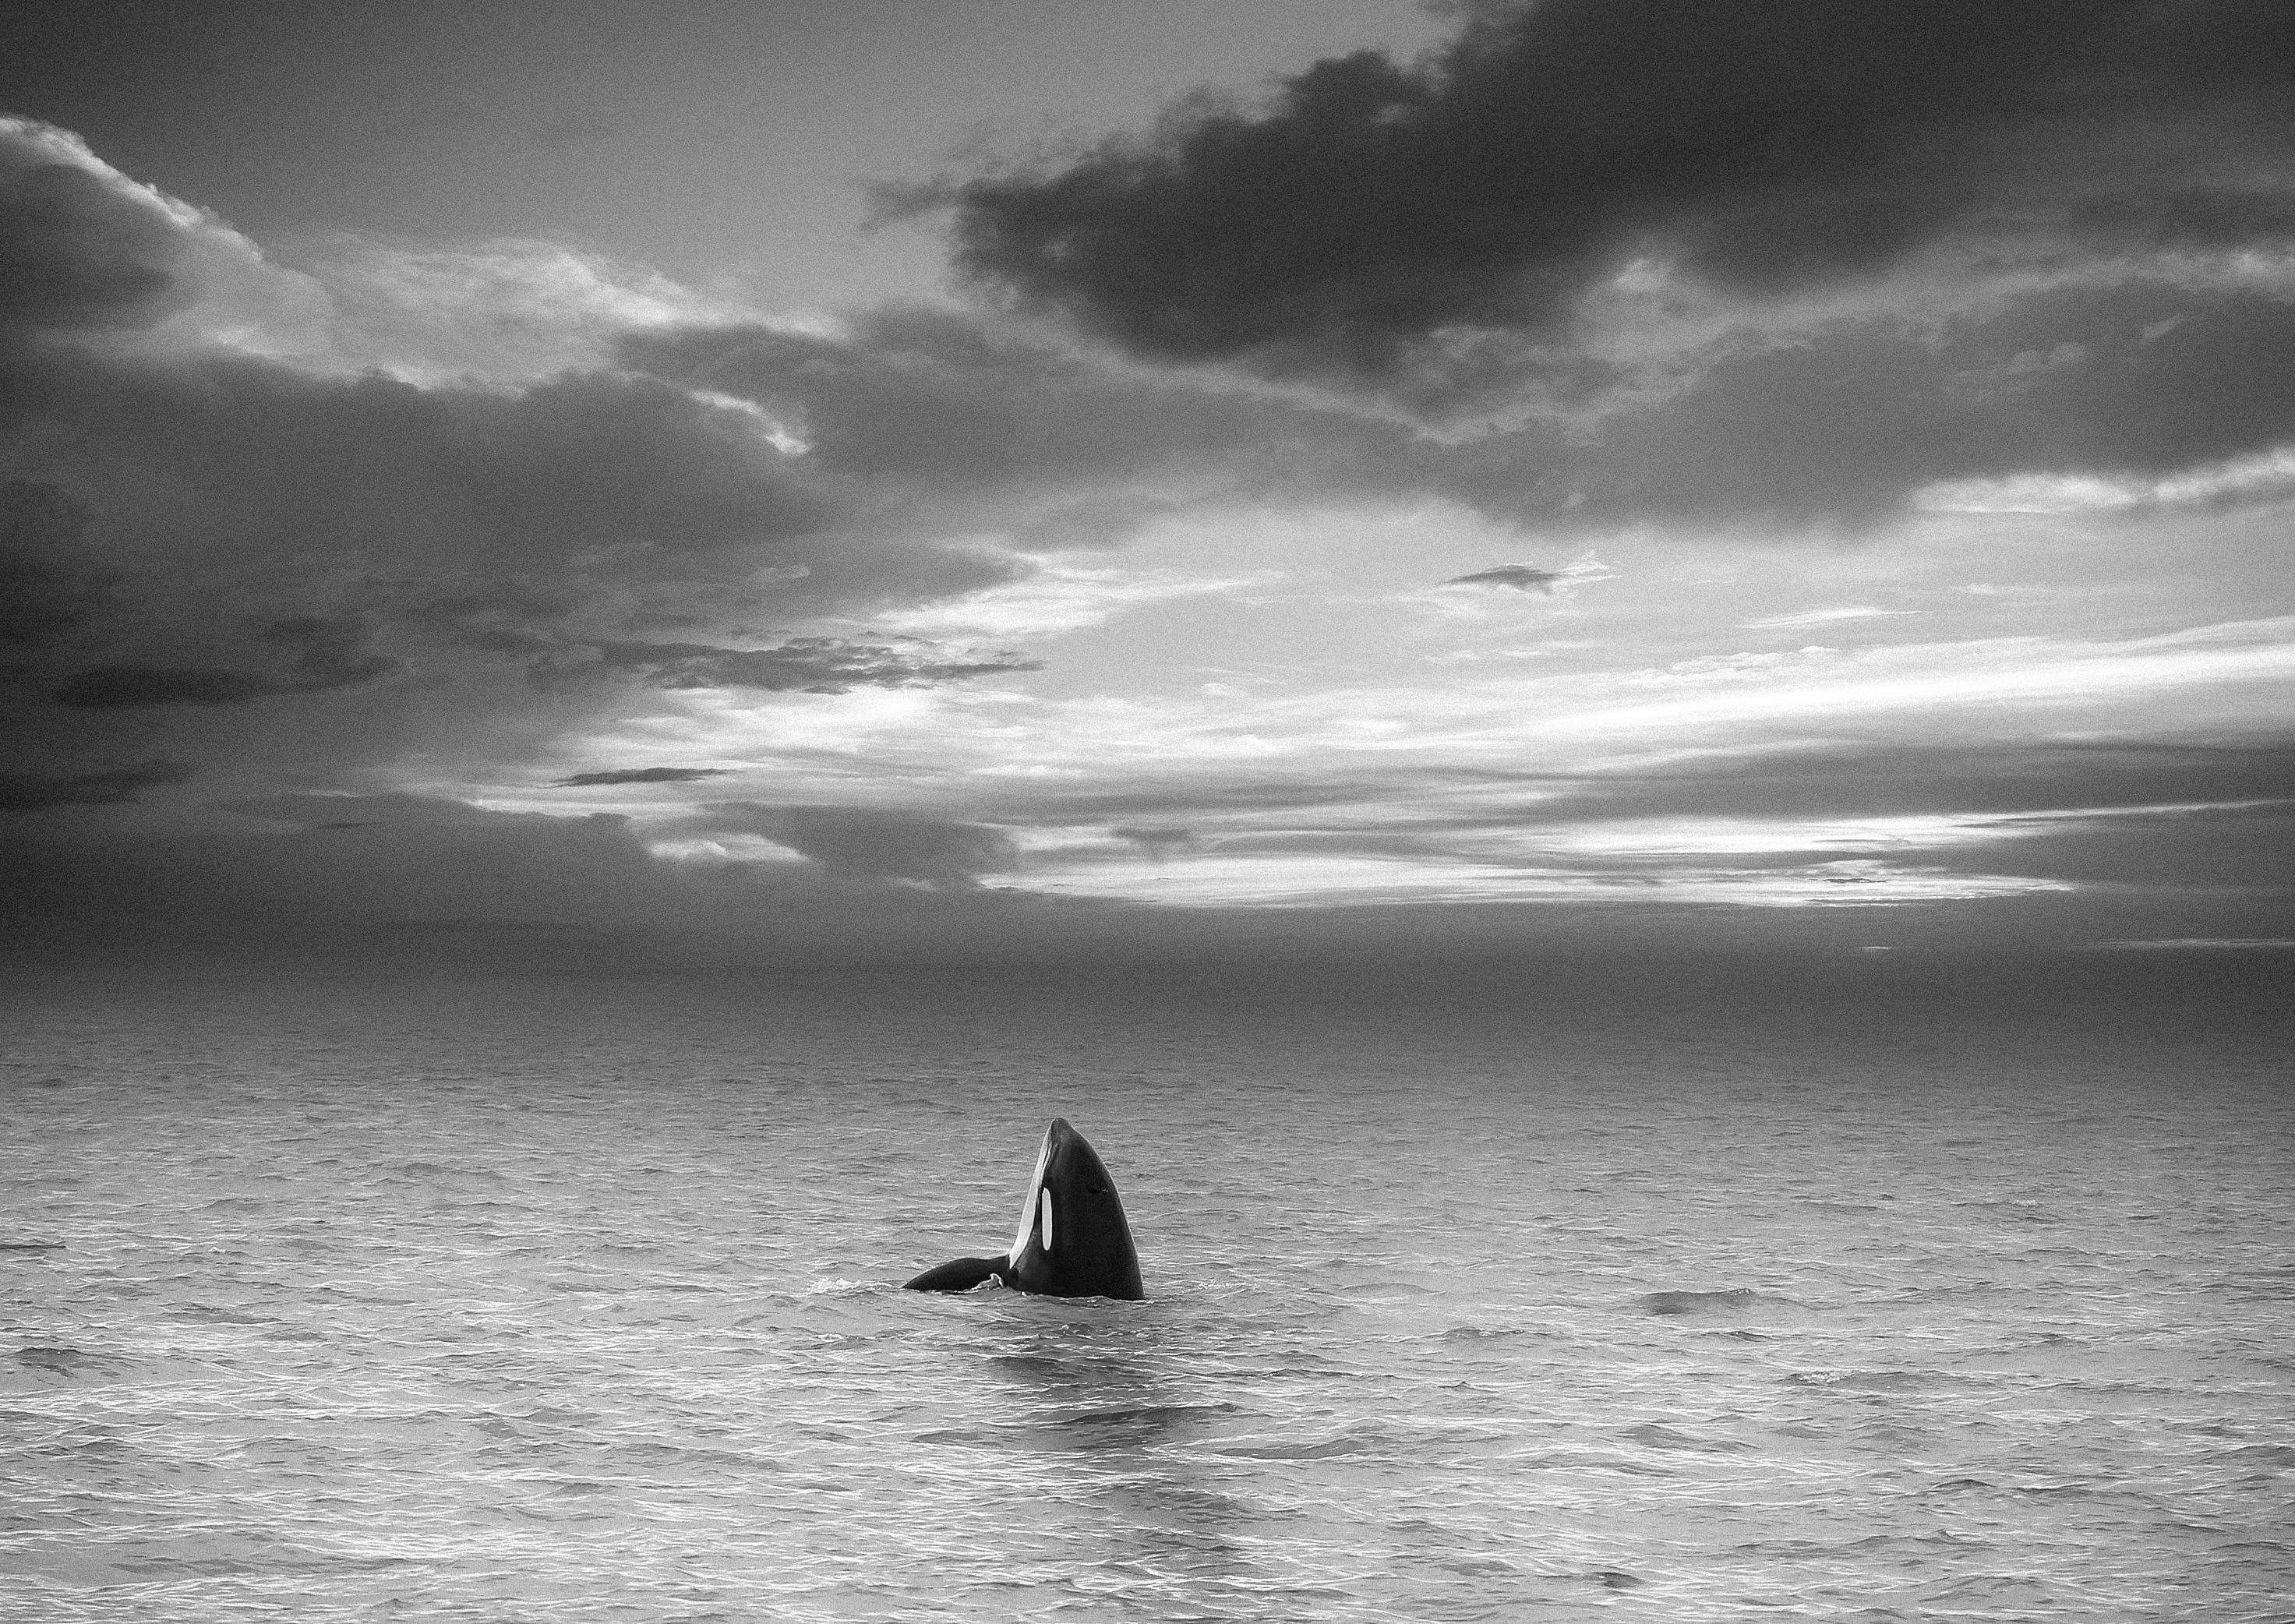 "To the Heavens" Last known photograph of the Killer Whale "Granny" Photography